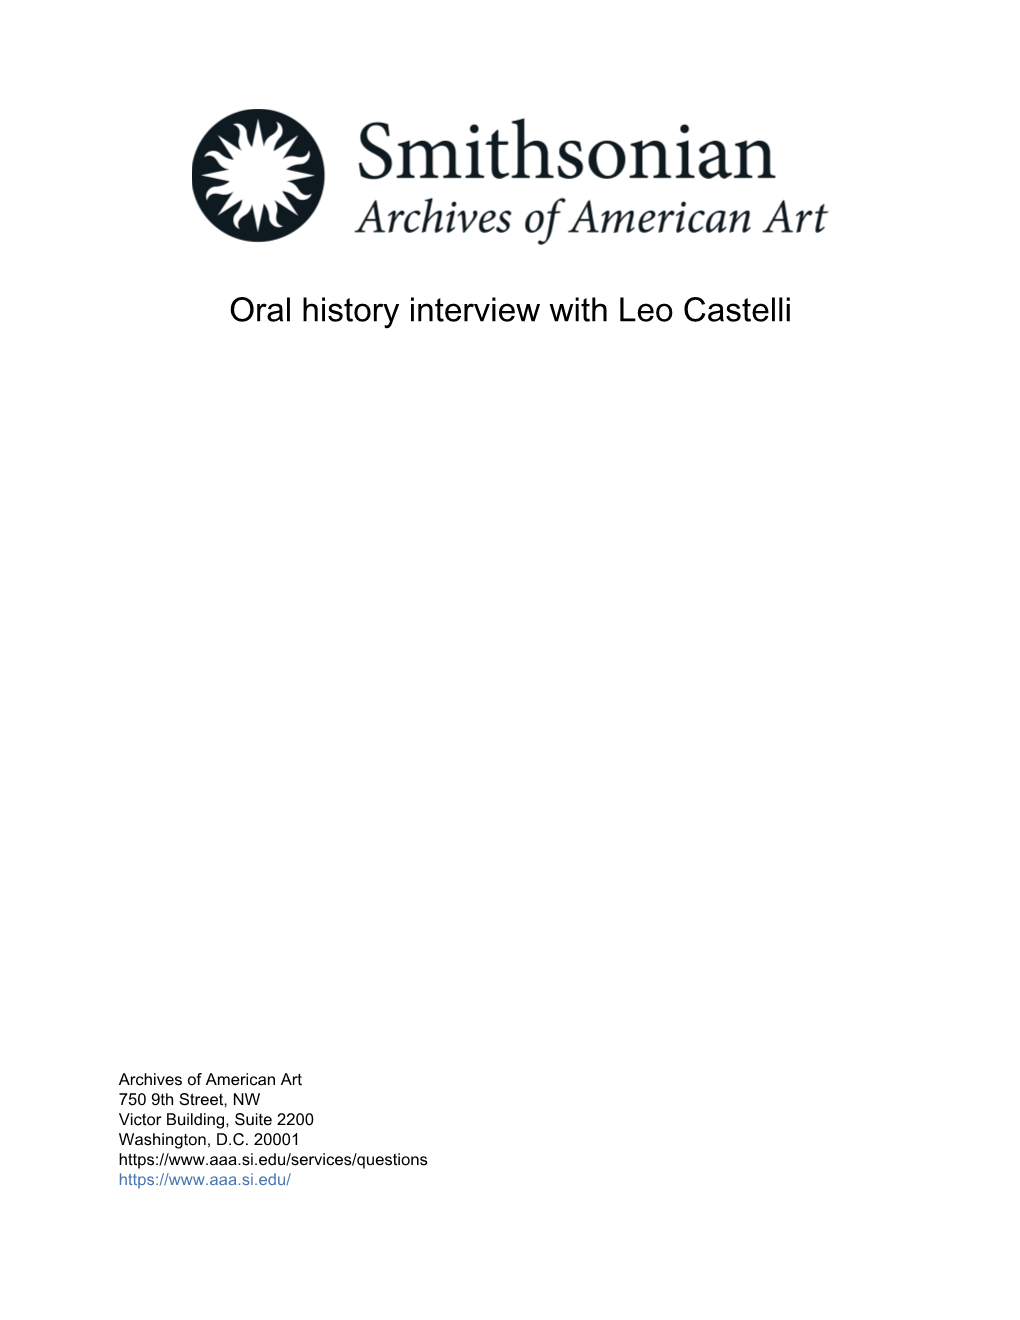 Oral History Interview with Leo Castelli